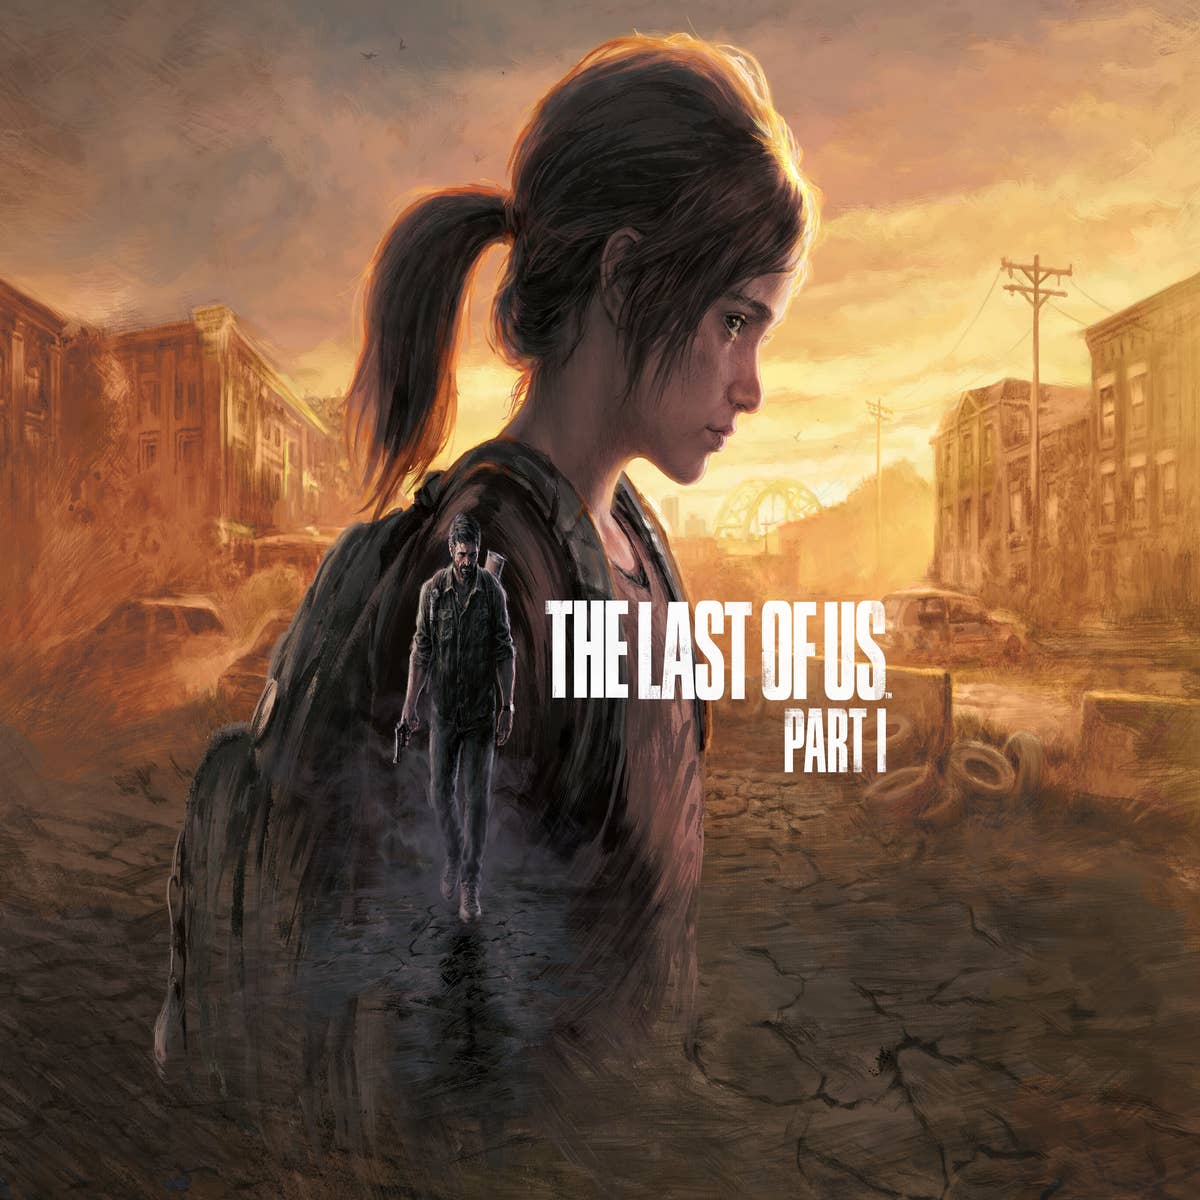 The Last Of Us Part 1 PS5 Review: A Fine But Unnecessary Remake